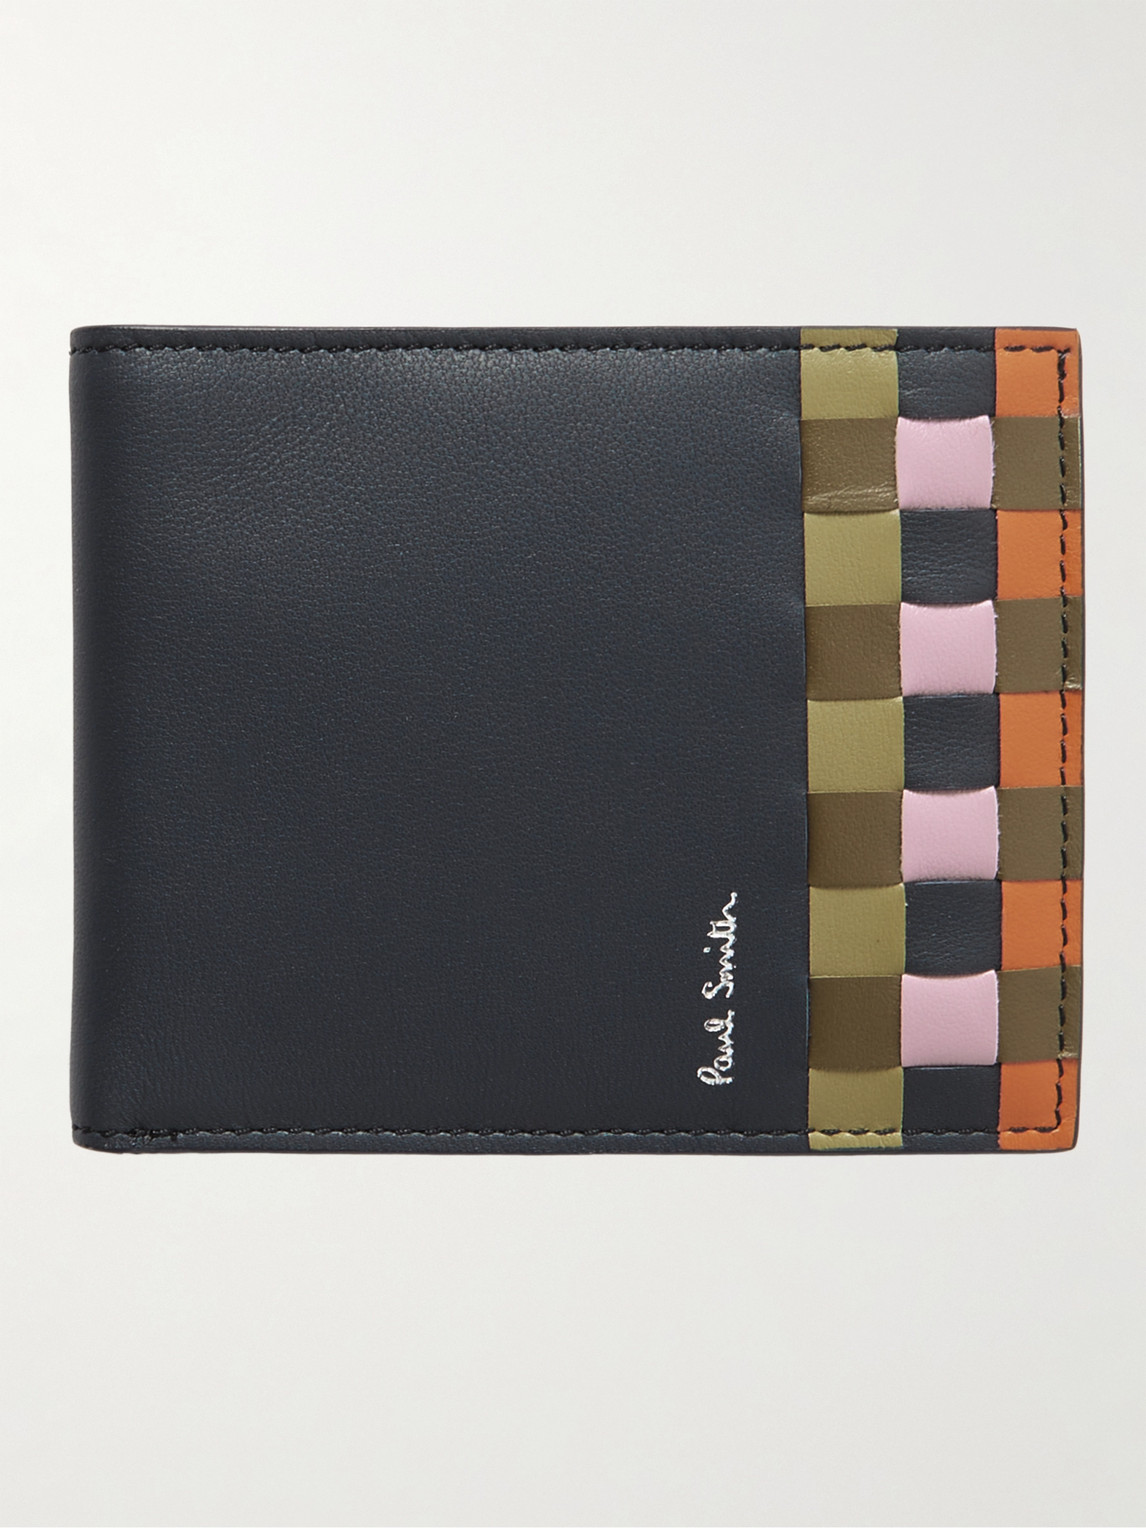 PAUL SMITH CHECKED LEATHER BILLFOLD WALLET